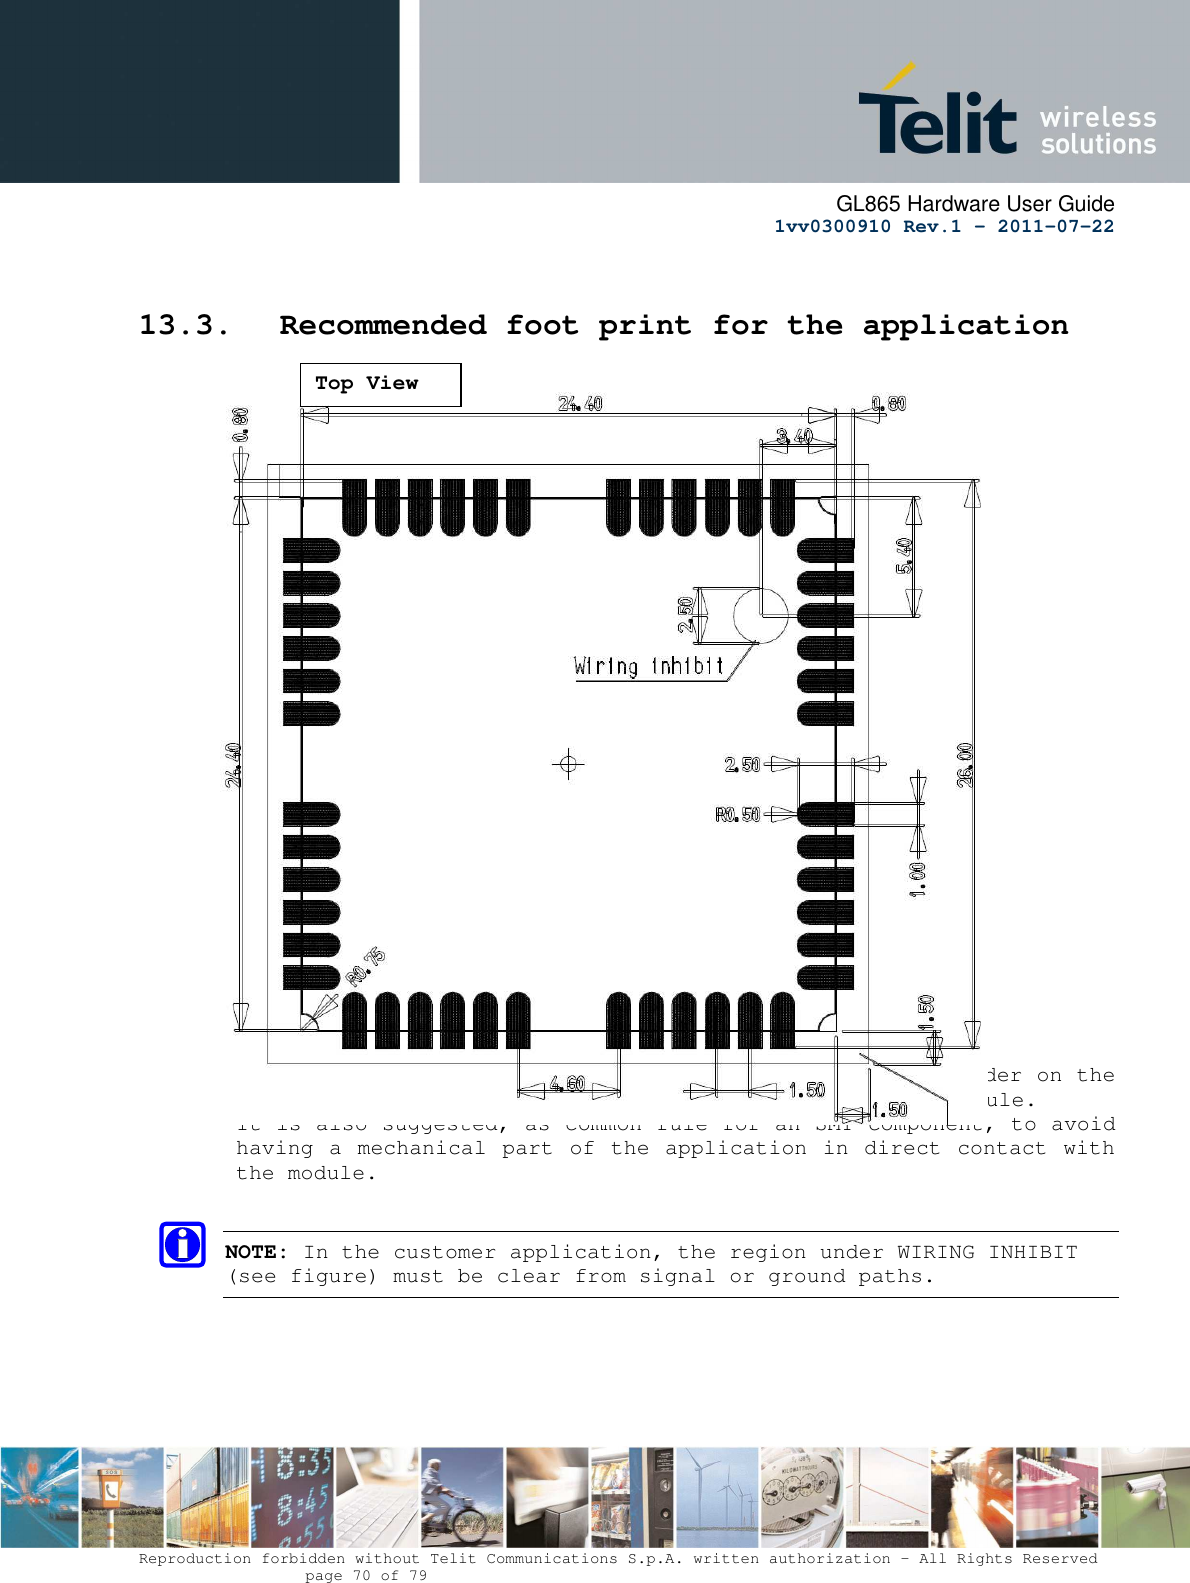      GL865 Hardware User Guide     1vv0300910 Rev.1 – 2011-07-22       Reproduction forbidden without Telit Communications S.p.A. written authorization - All Rights Reserved    page 70 of 79   13.3. Recommended foot print for the application                              In order to easily rework the GE865 is suggested to consider on the application a 1.5 mm placement inhibit area around the module. It is also suggested, as common rule for an SMT component, to avoid having a mechanical part of the application in direct contact with the module.  NOTE: In the customer application, the region under WIRING INHIBIT (see figure) must be clear from signal or ground paths. Top View 